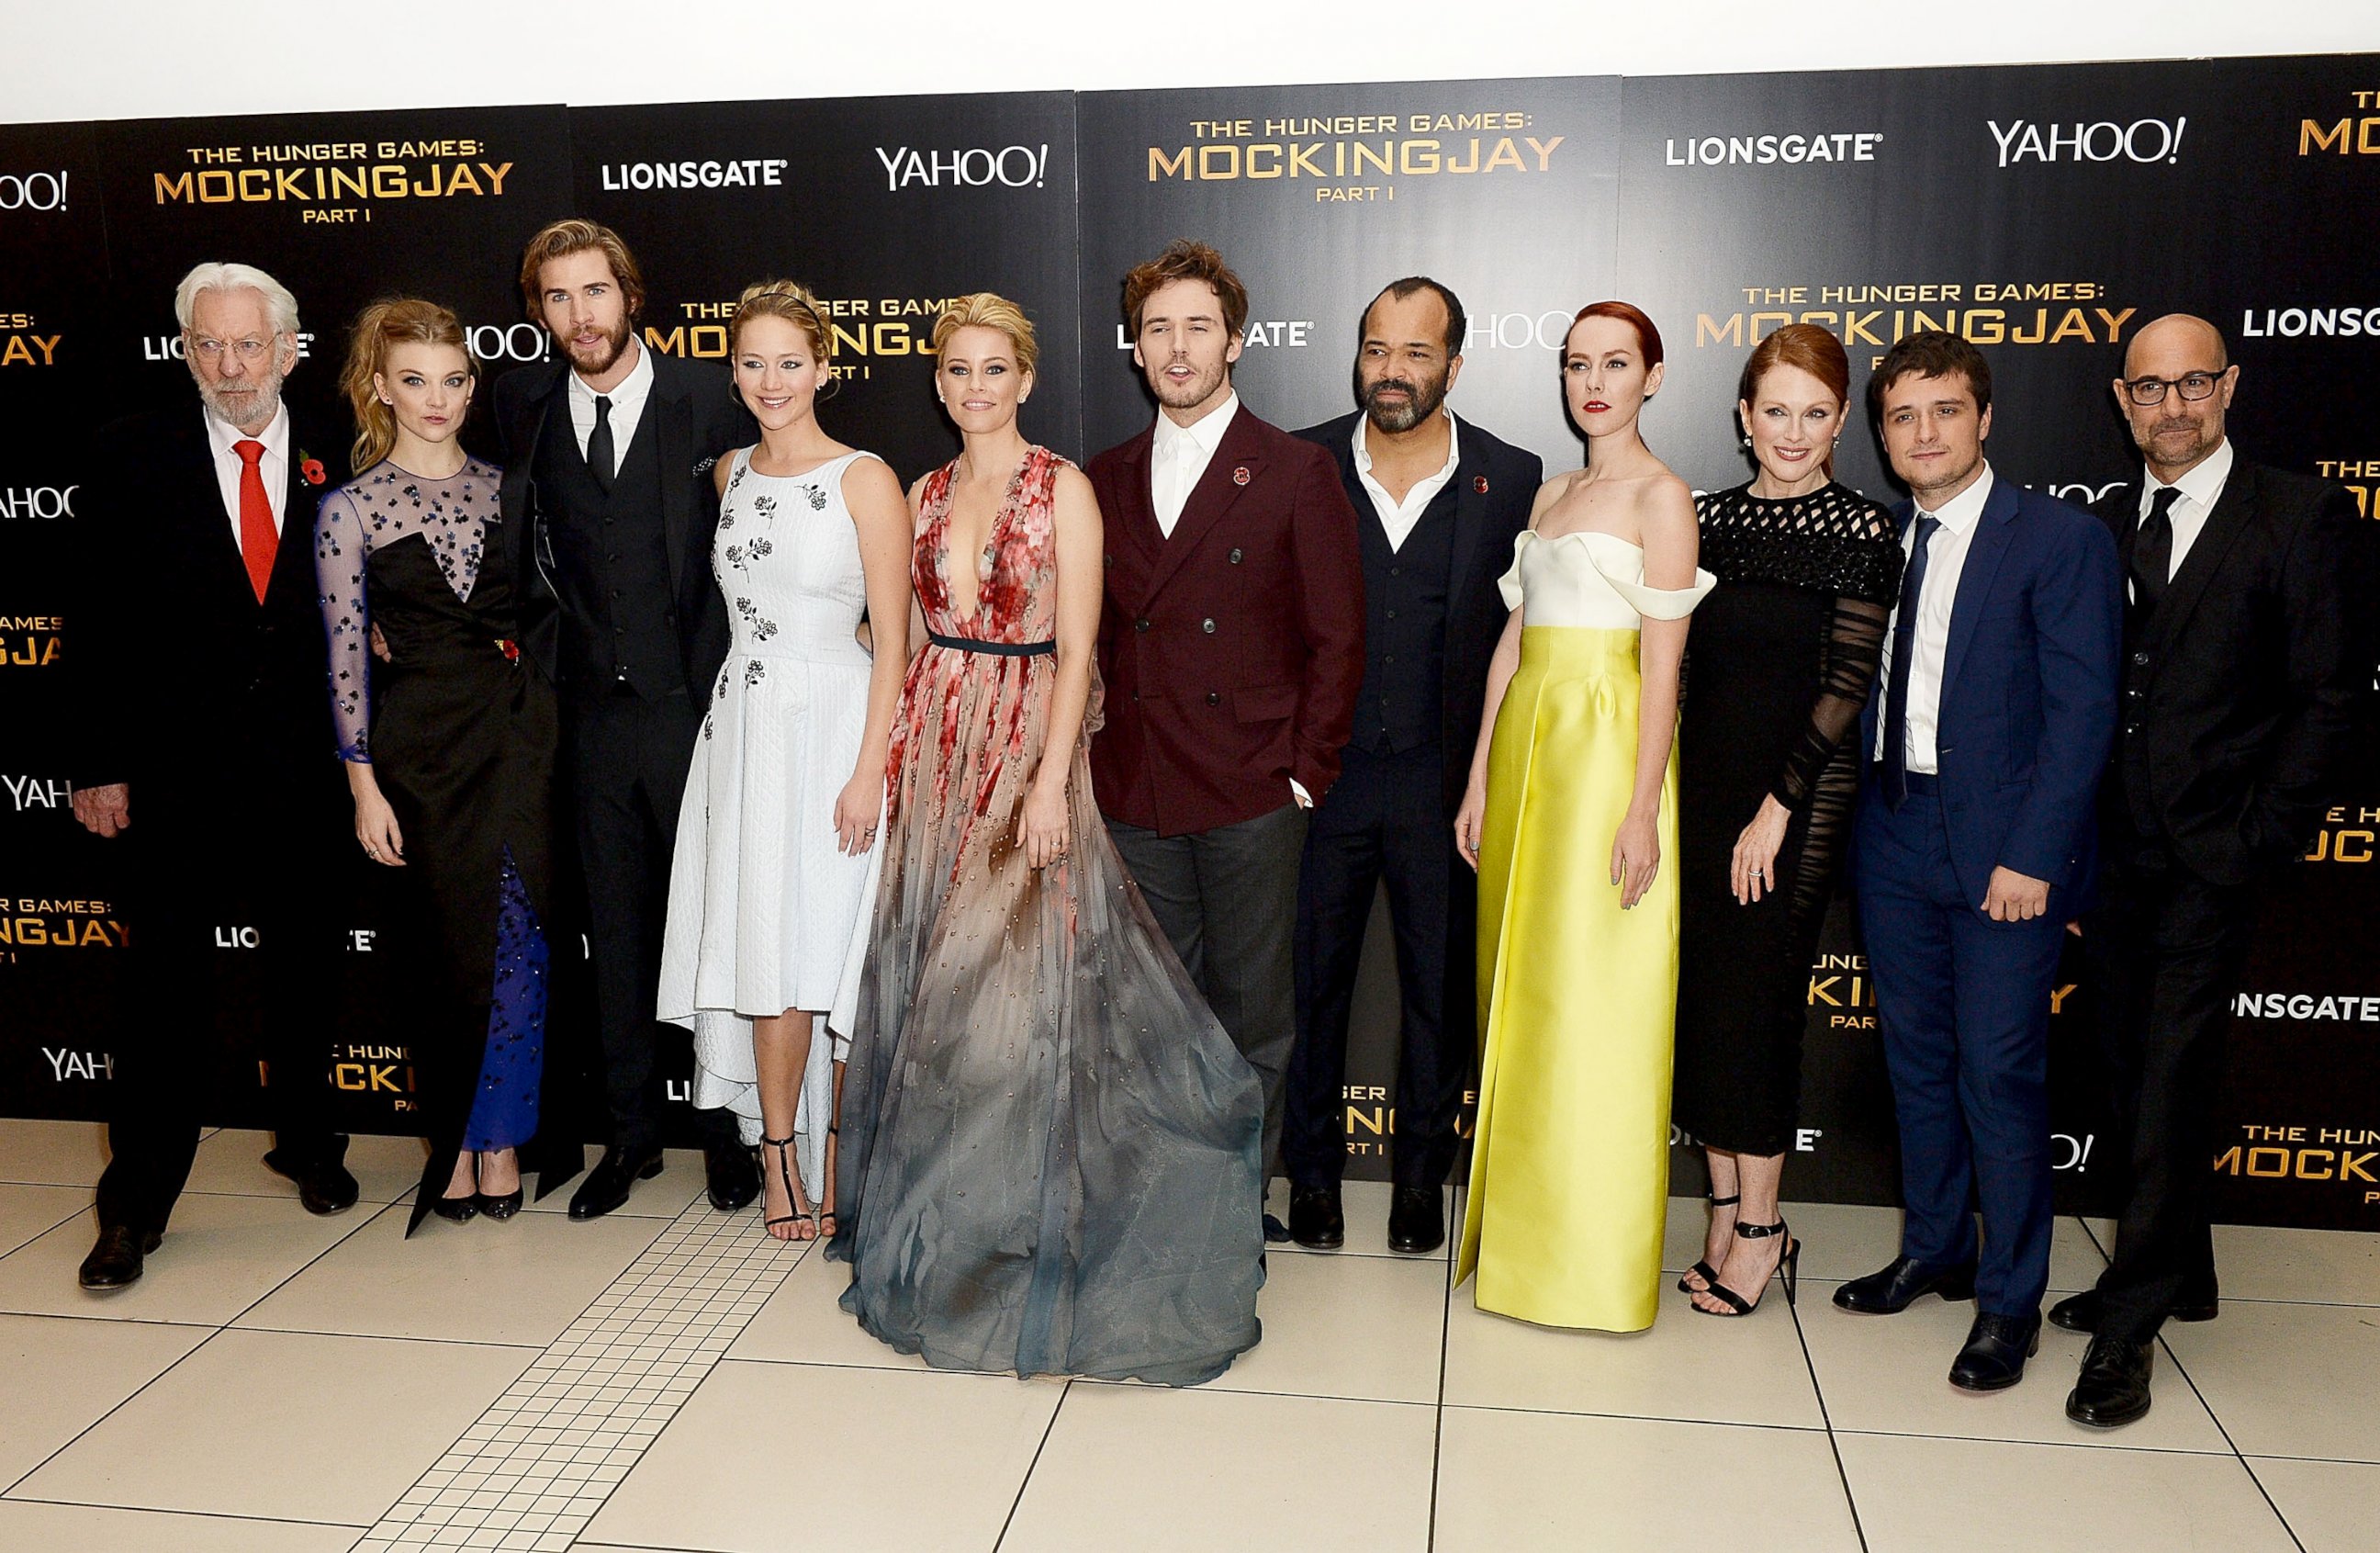 PHOTO: The Hunger Games cast attend the World Premiere of "The Hunger Games: Mockingjay Part 1" at Odeon Leicester Square, Nov. 10, 2014 in London.